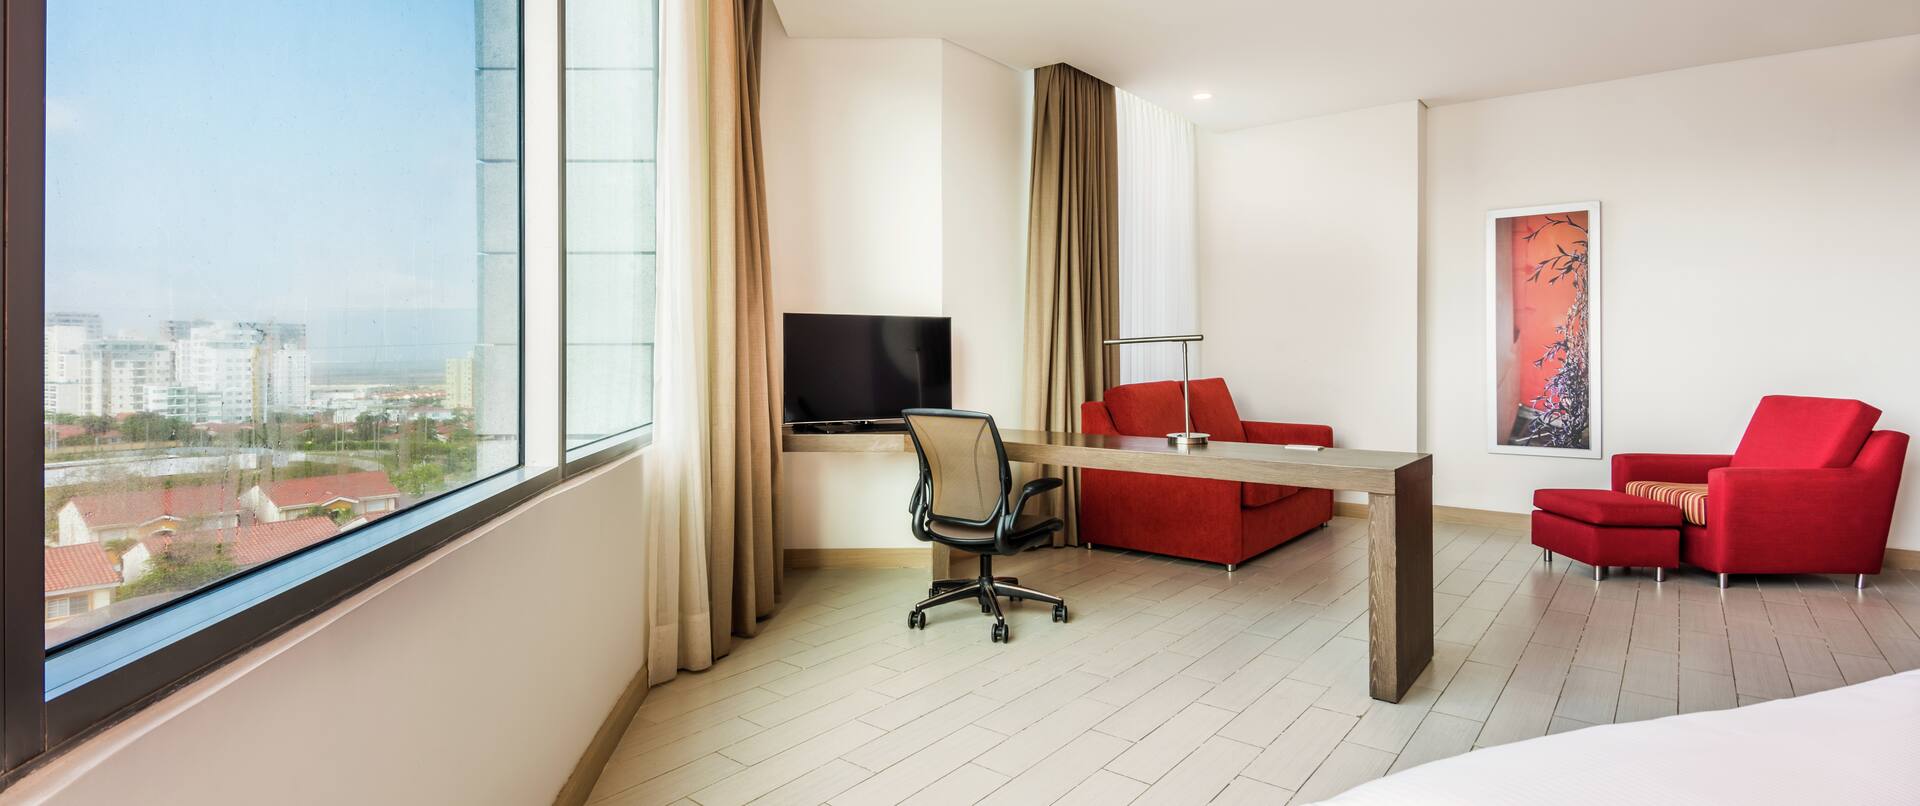 Spacious suite with expansive windows, desk with chair, armchairs and HDTV.